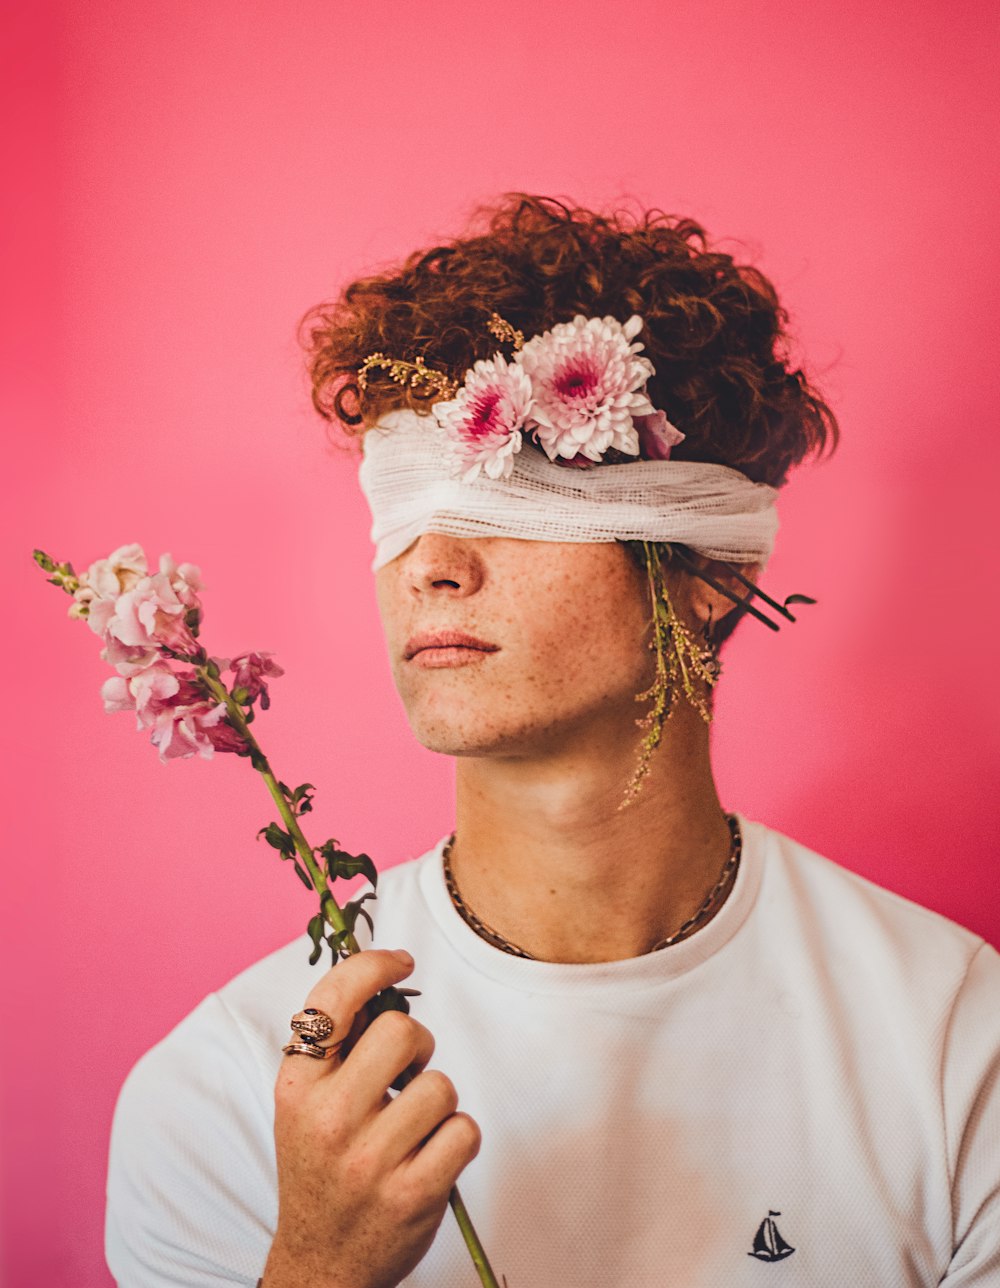 a man wearing a blindfold holding a flower